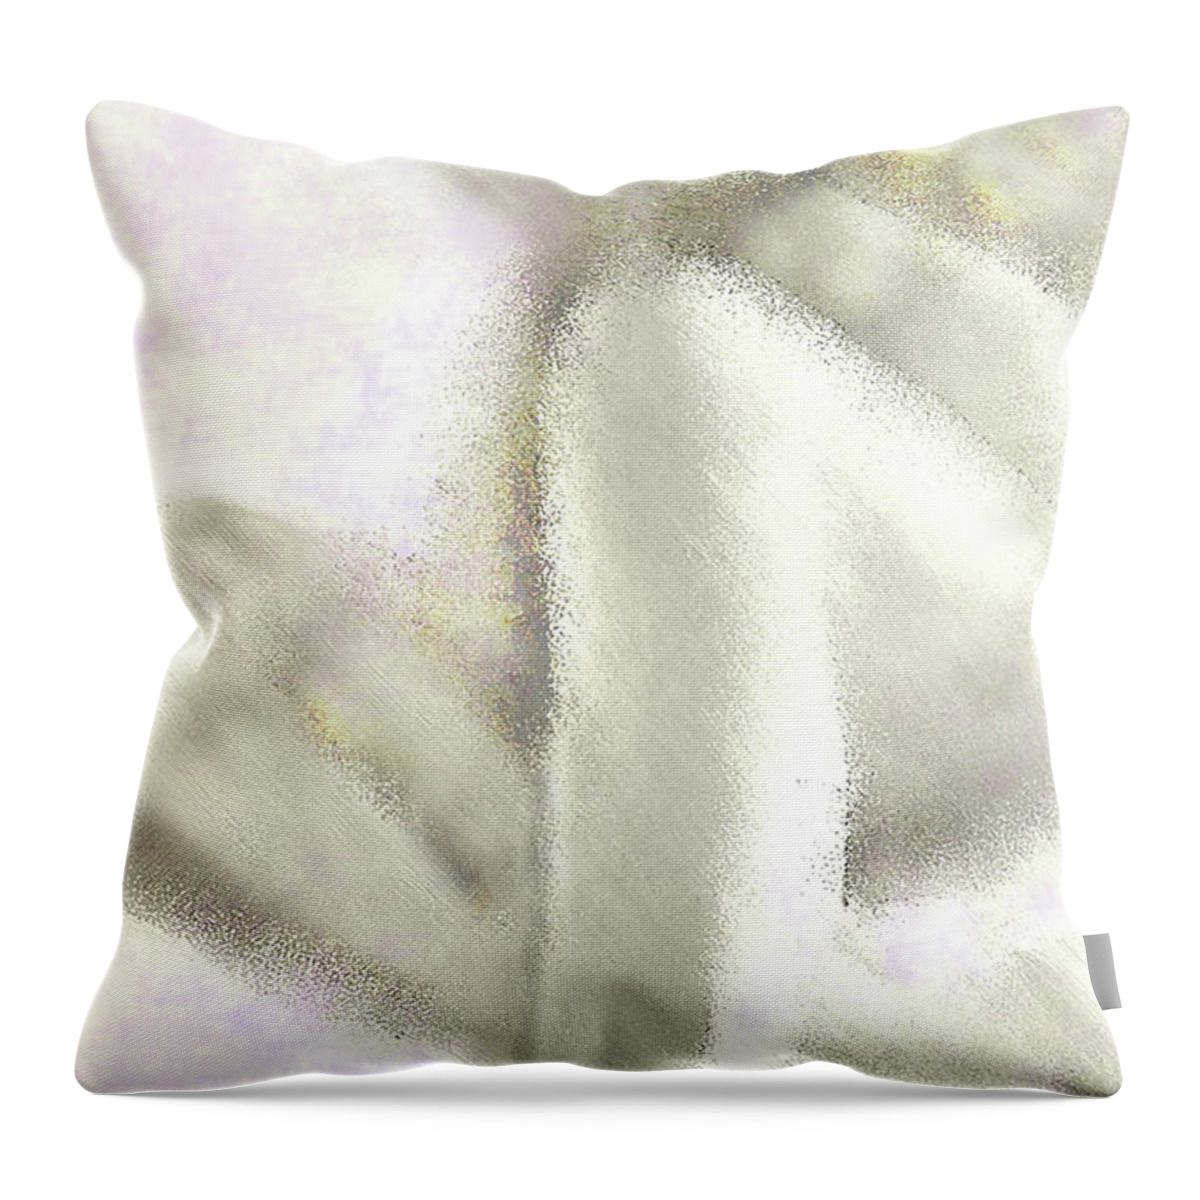 Nude Throw Pillow featuring the digital art Sitting Nude by Jeff Breiman